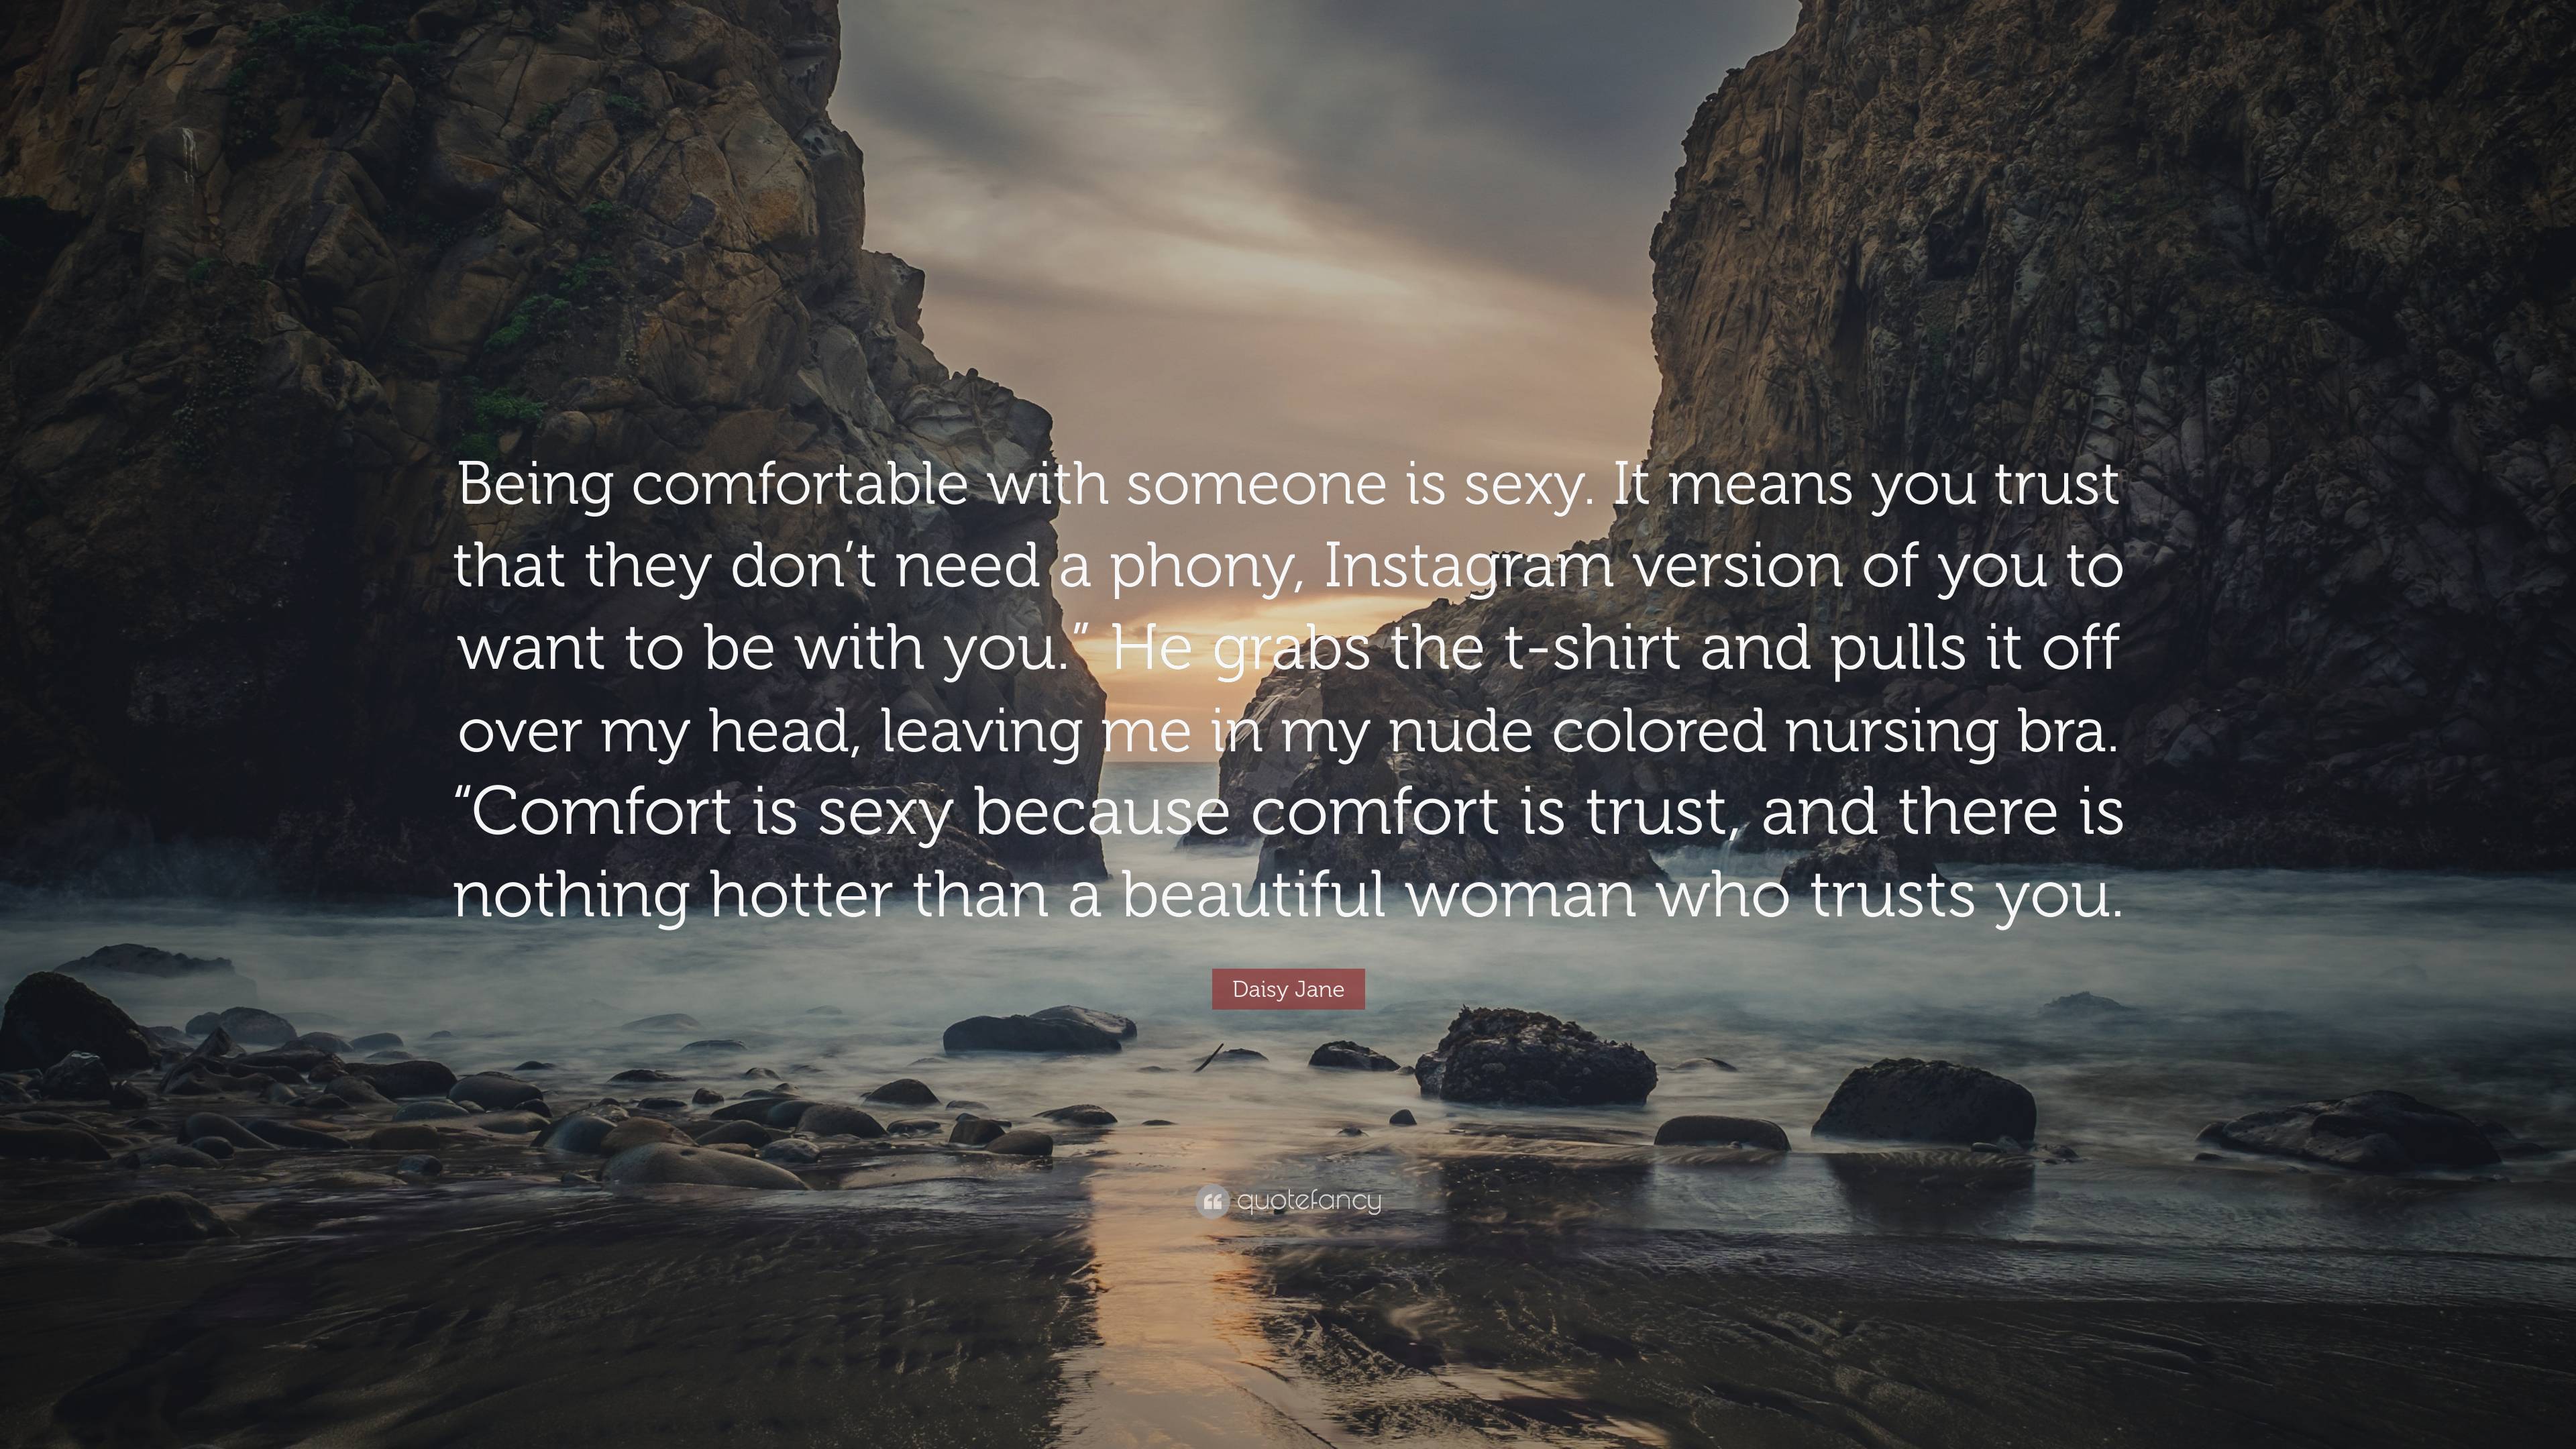 Daisy Jane Quote: “Being comfortable with someone is sexy. It means you  trust that they don't need a phony, Instagram version of you to wan”